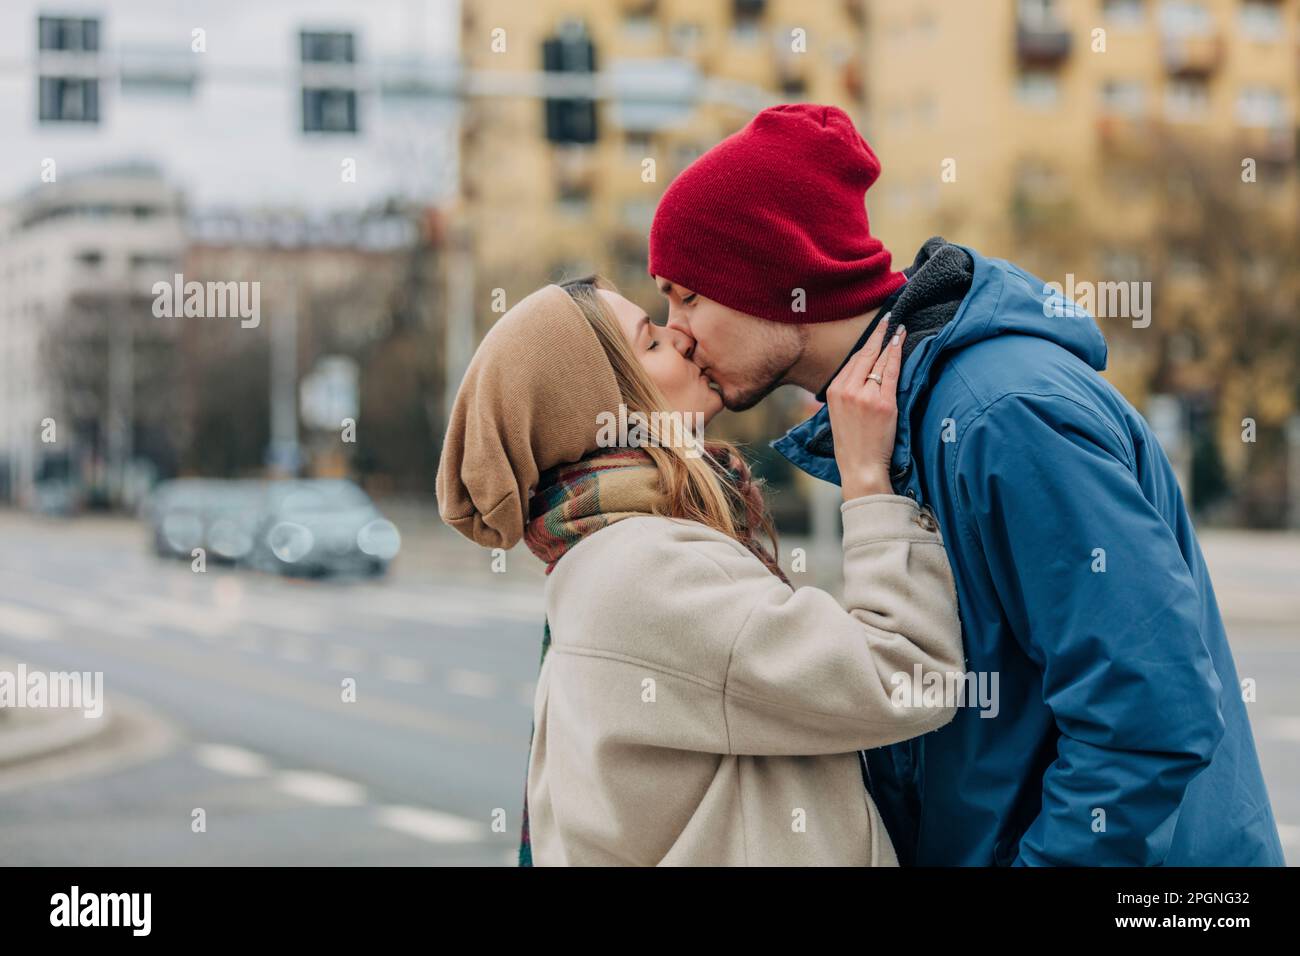 Romantic couple kissing each other at street Stock Photo